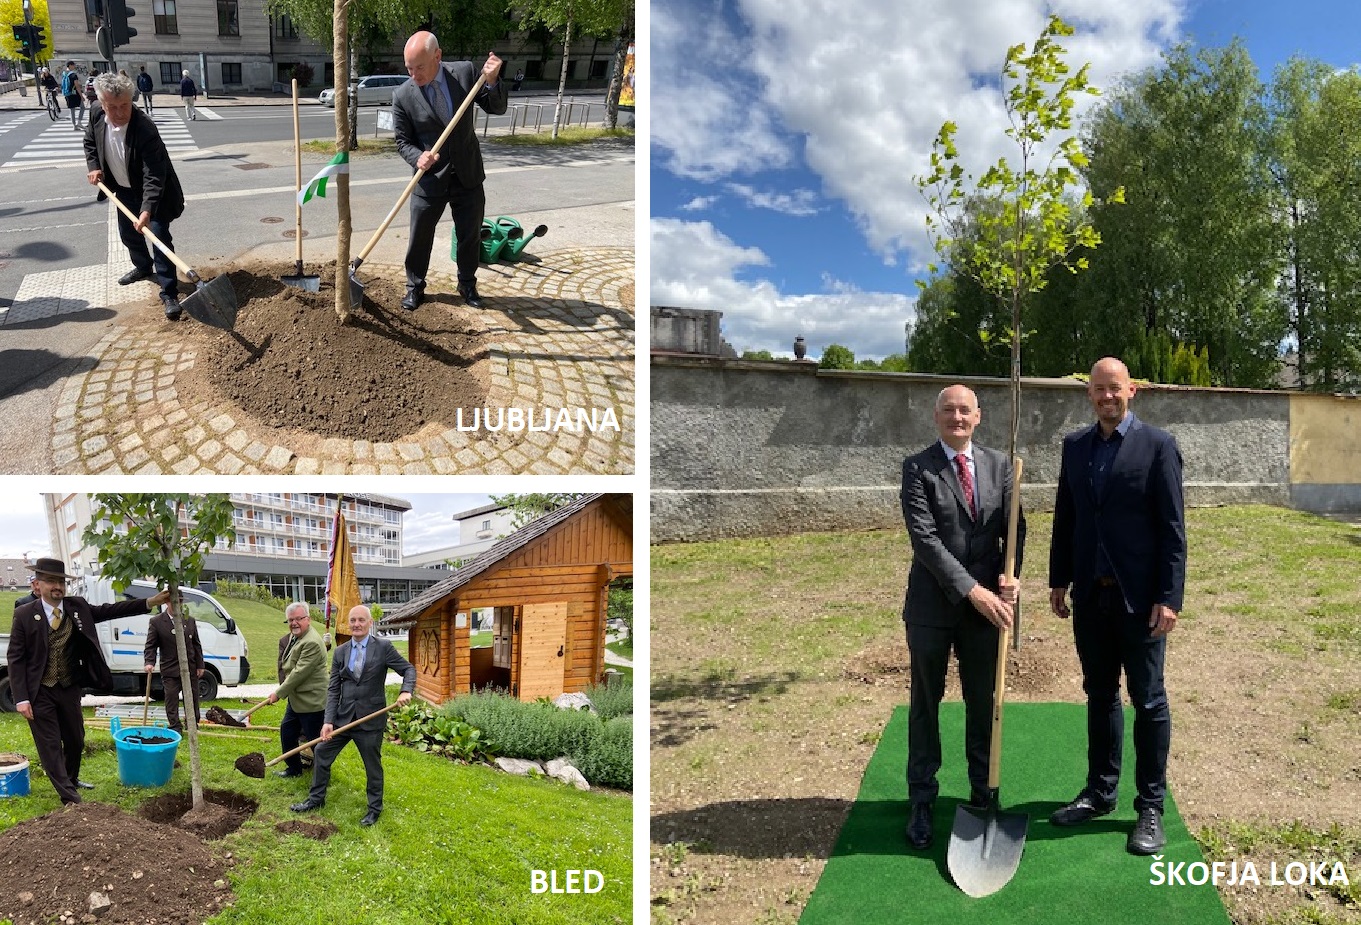 Embassy marks friendship with municipalities with trees for bees